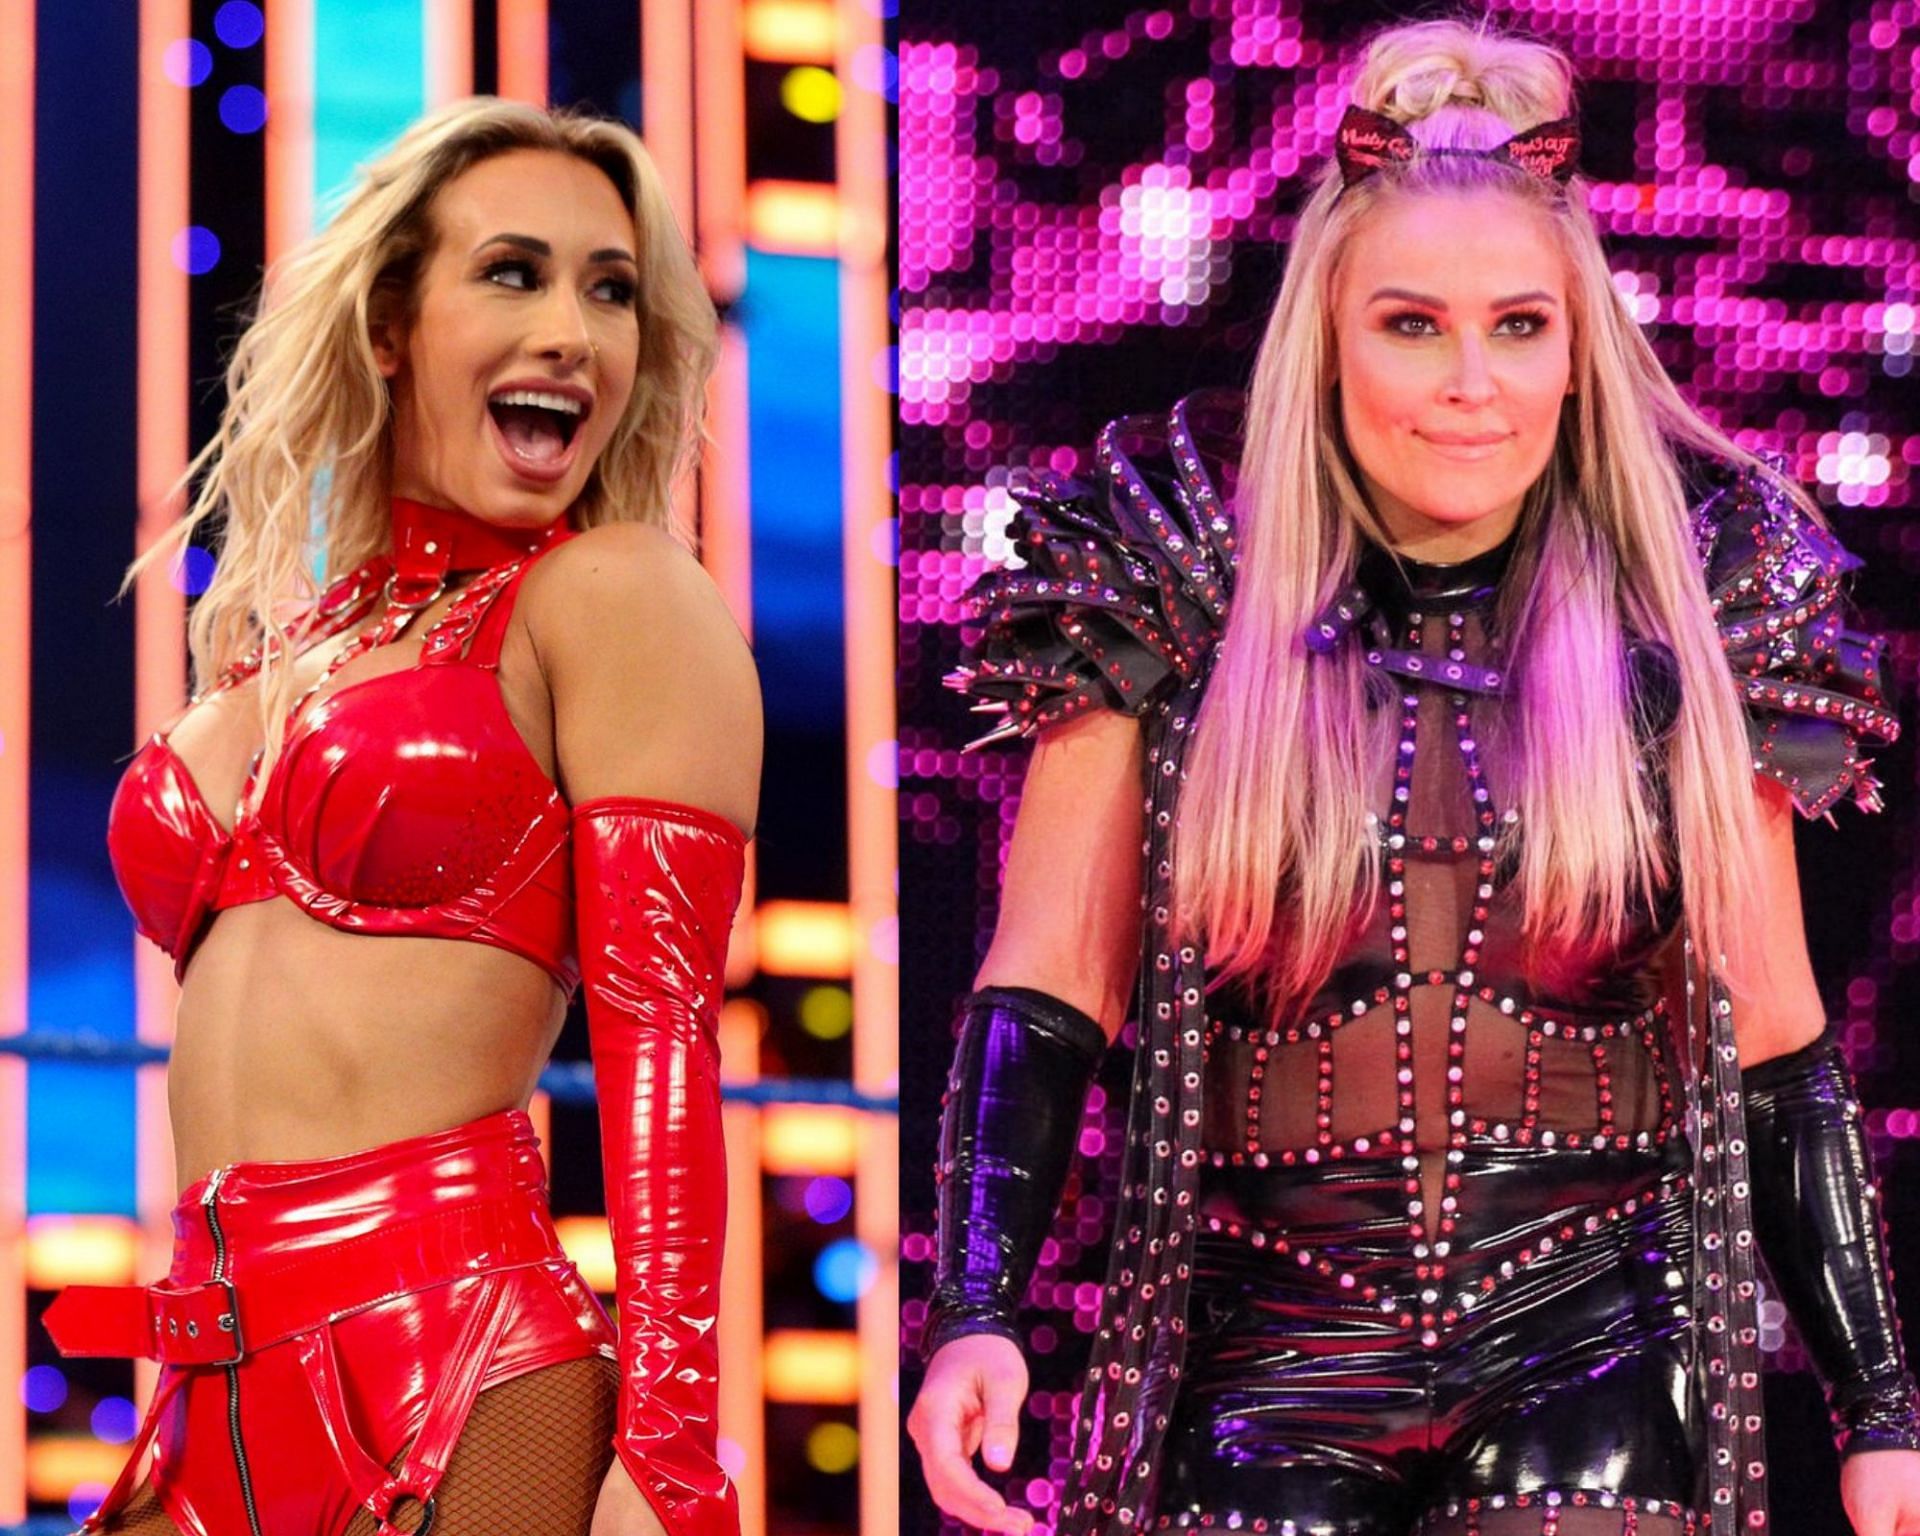 Carmella and Natalya will both compete at the WWE Money in the Bank event